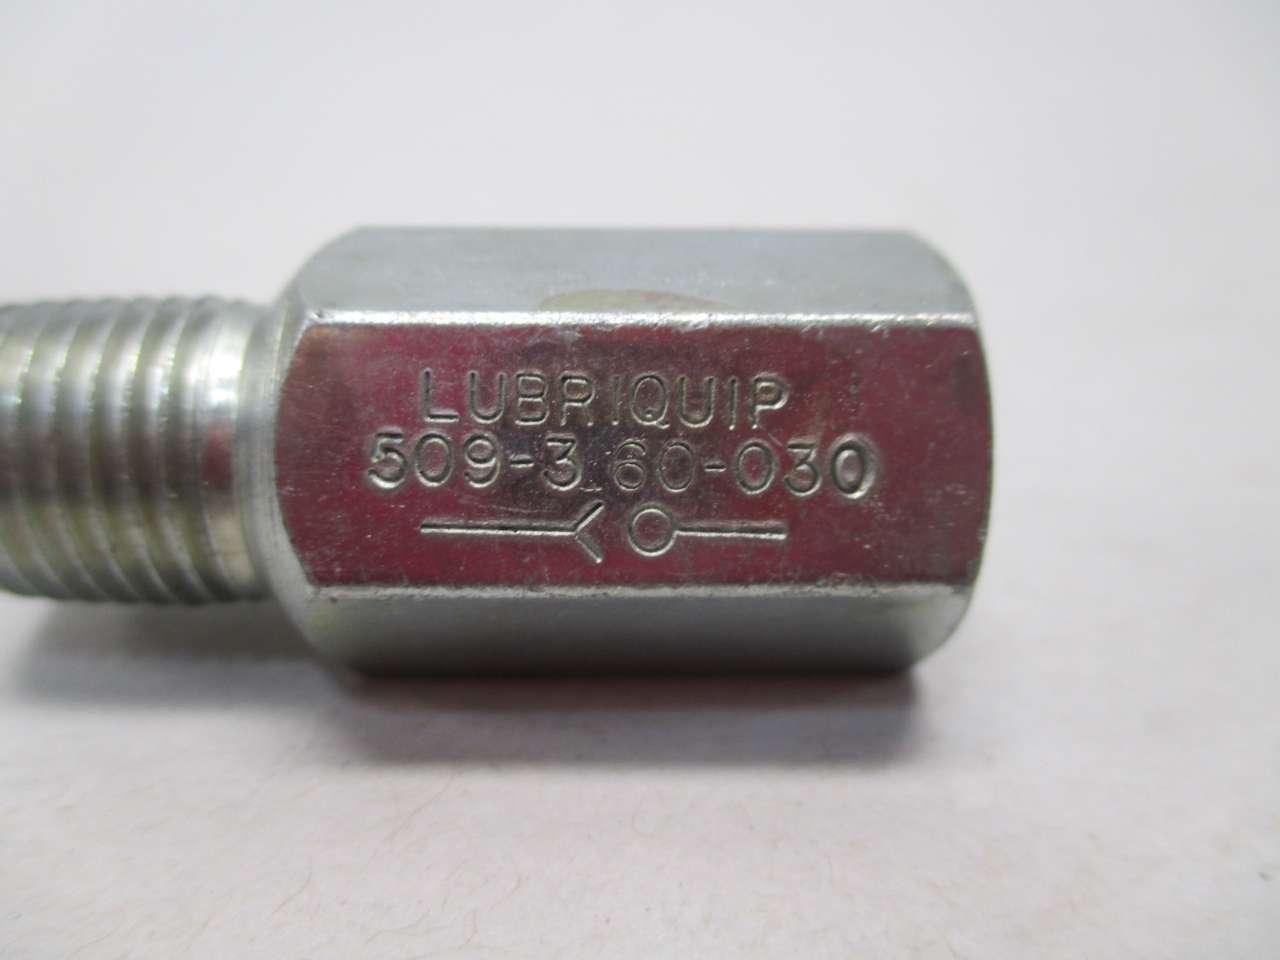 Lubriquip 509-365-030 Used Ball Valve 1/4"npt Pack of 5 